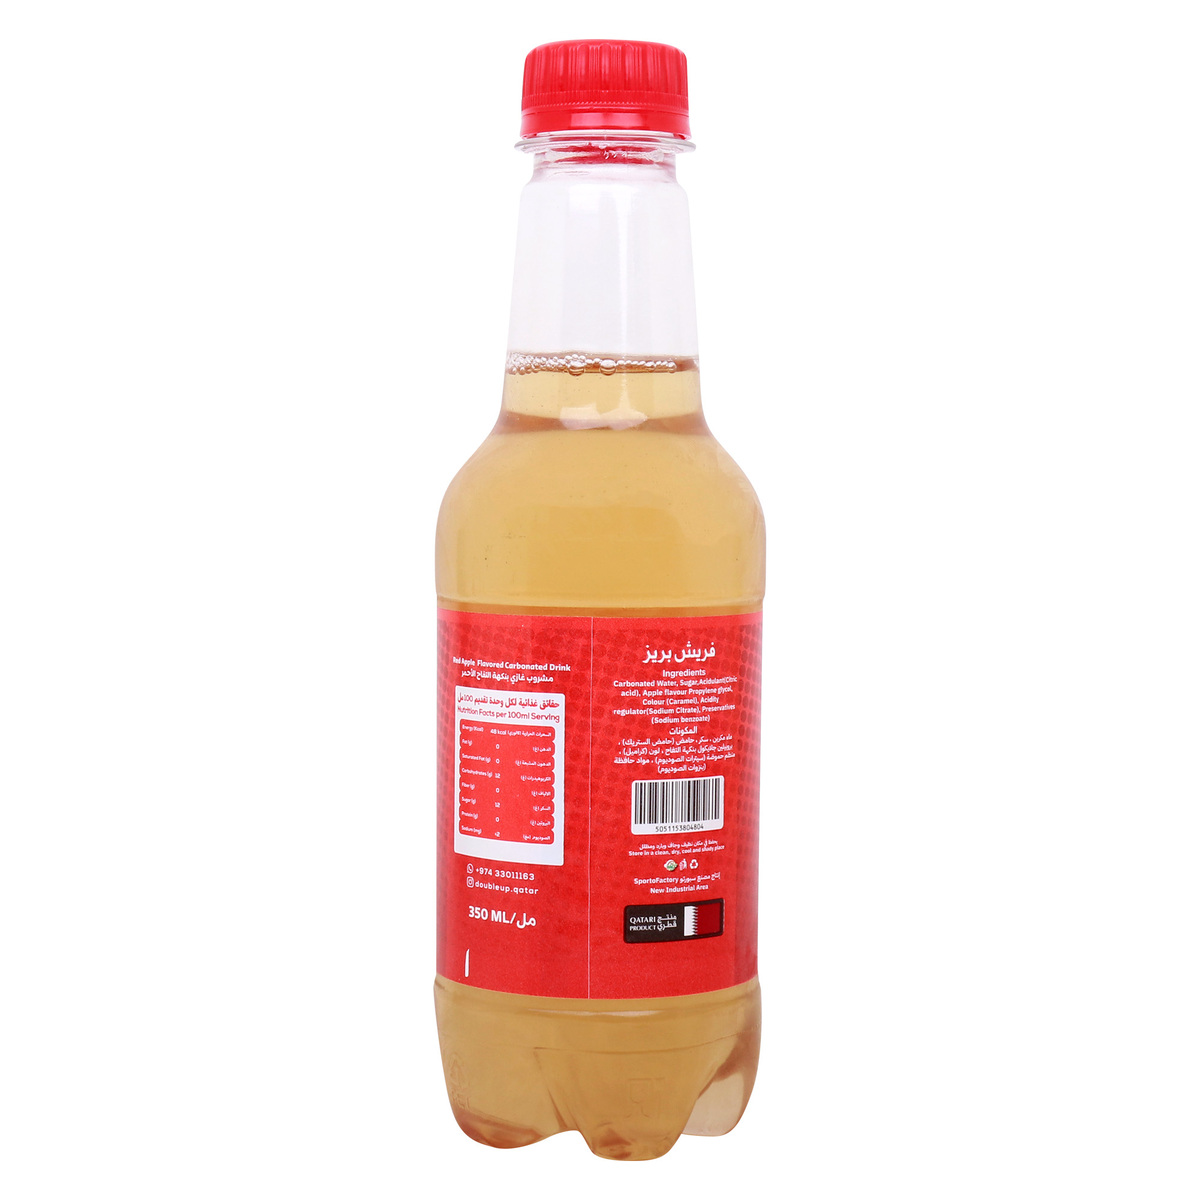 Double Up Fresh Breeze with Red Apple Flavored Carbonated Drink 350 ml